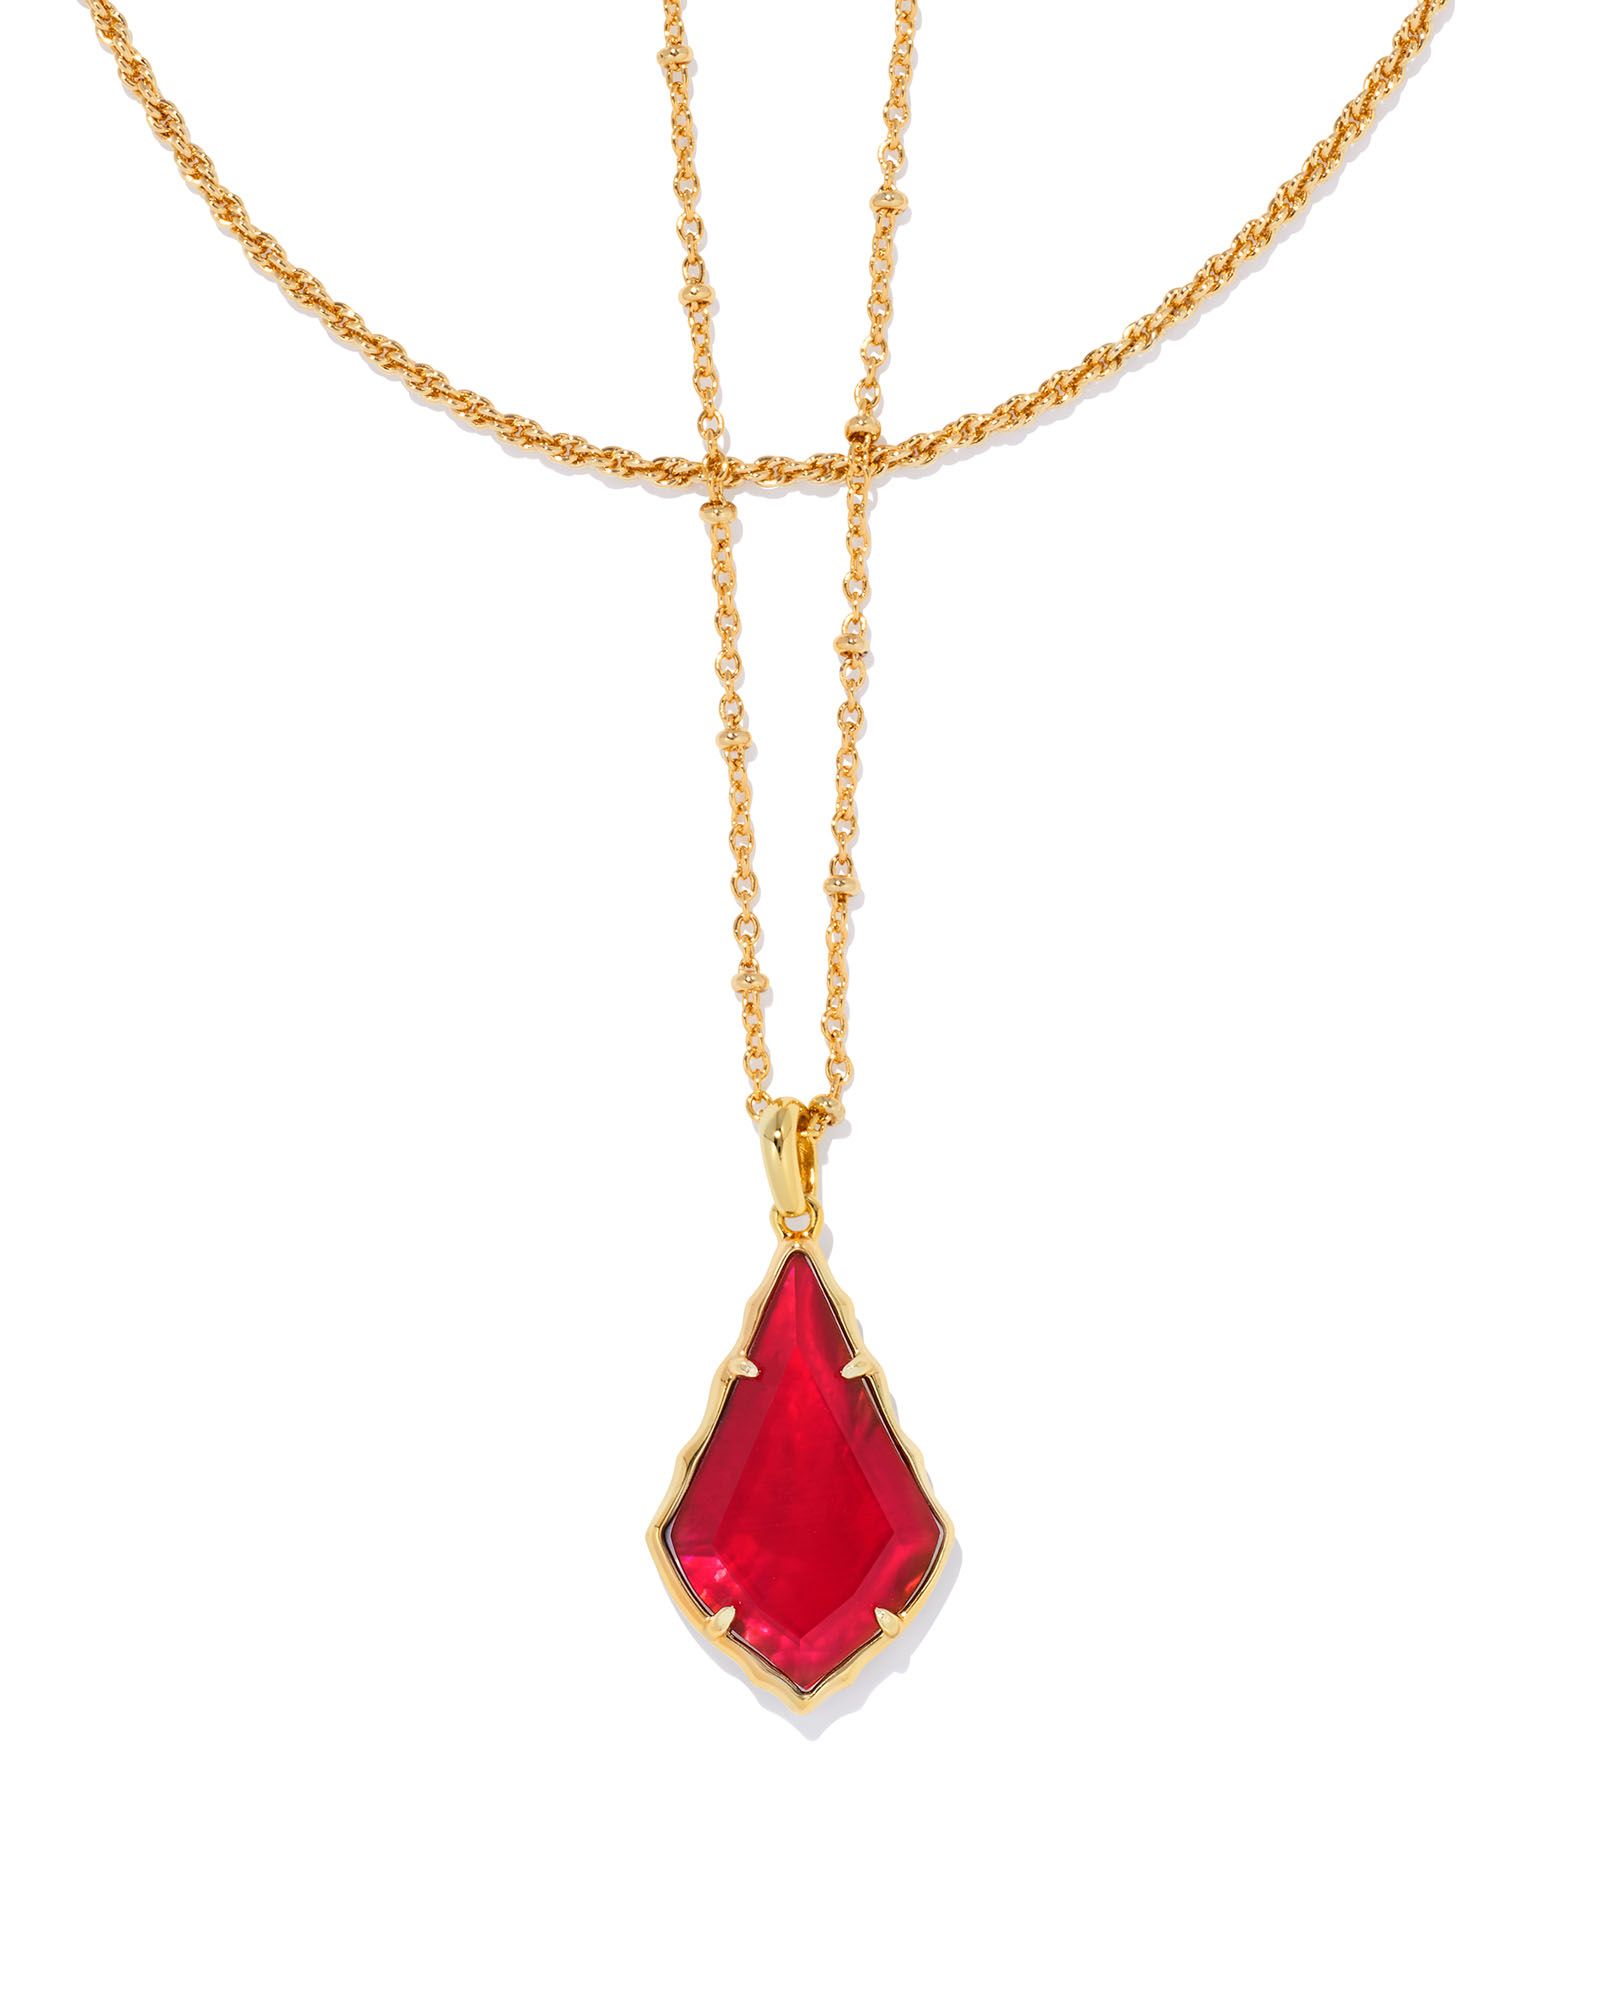 Faceted Alex Gold Convertible Necklace in Cranberry Illusion | Kendra Scott